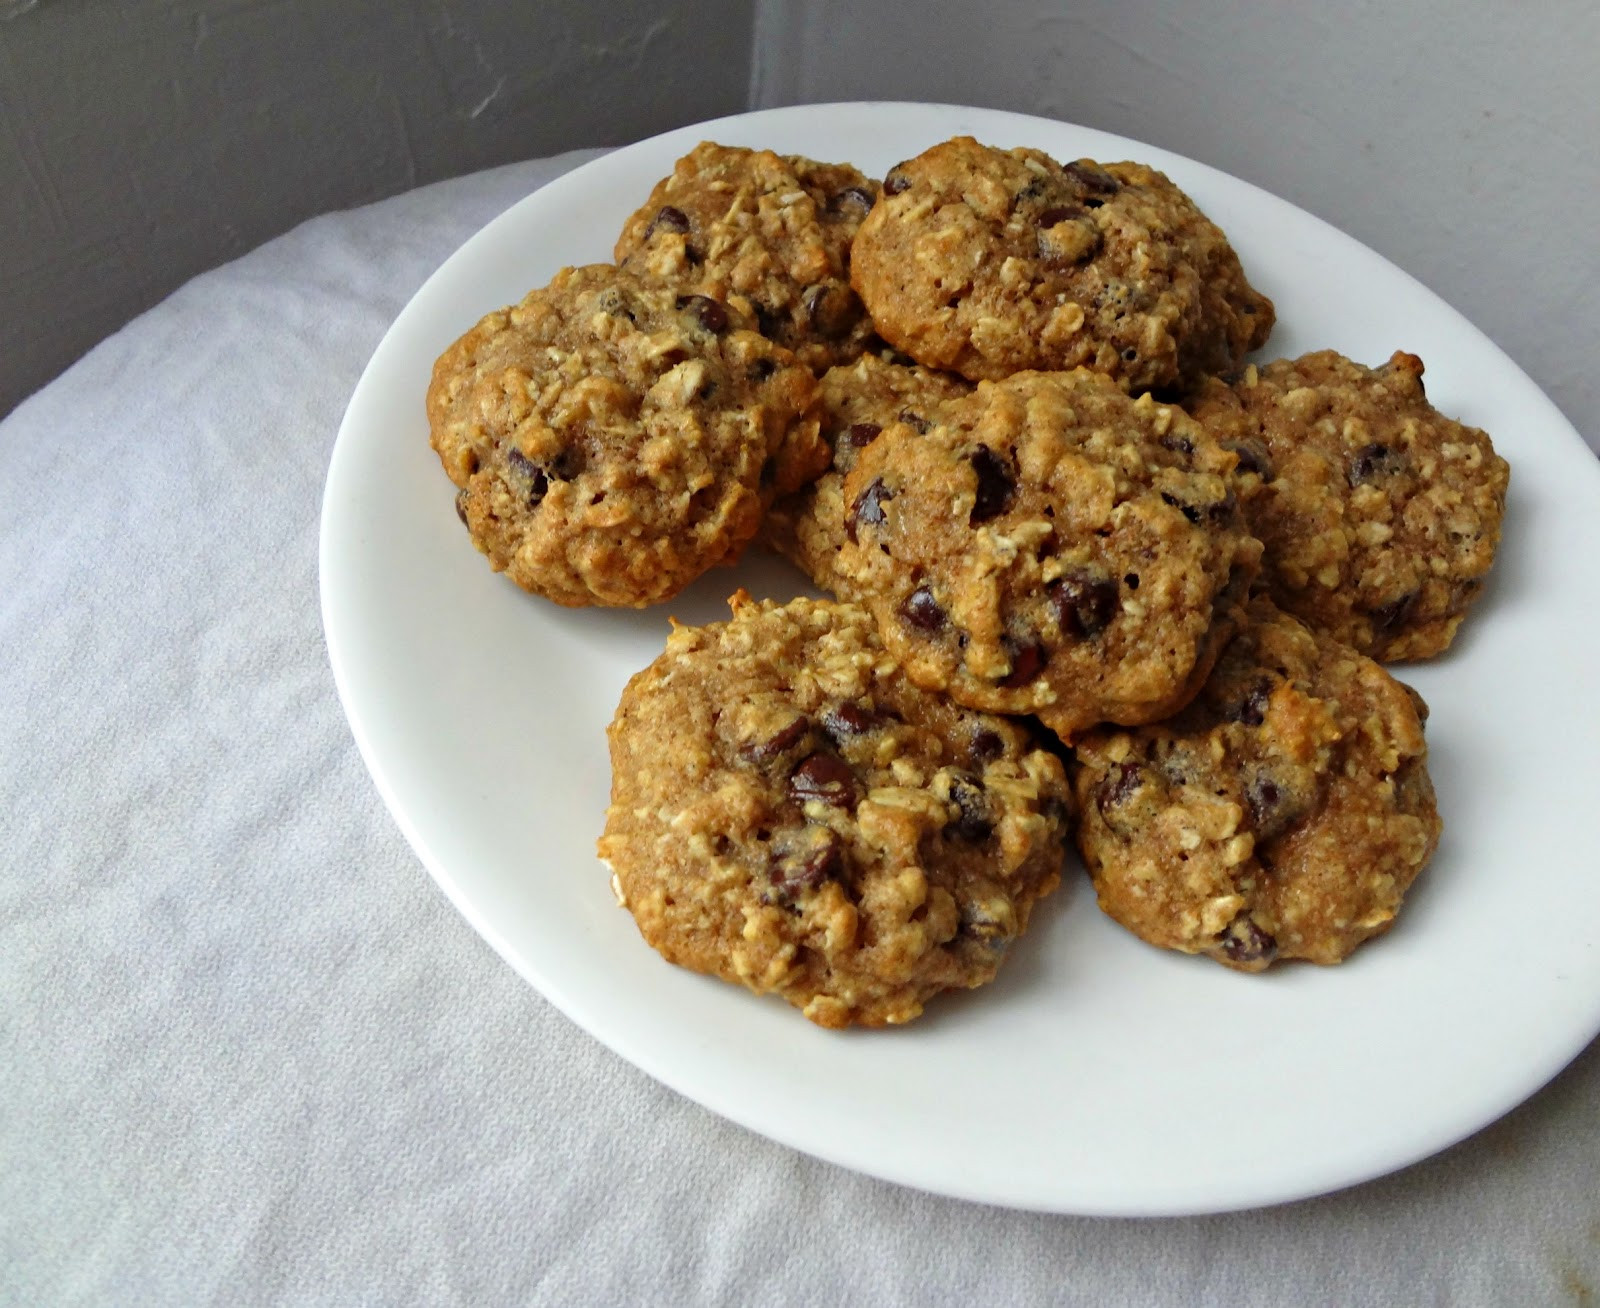 Chocolate Chip Oatmeal Cookies Healthy
 The Cooking Actress Healthy Oatmeal Chocolate Chip Cookies